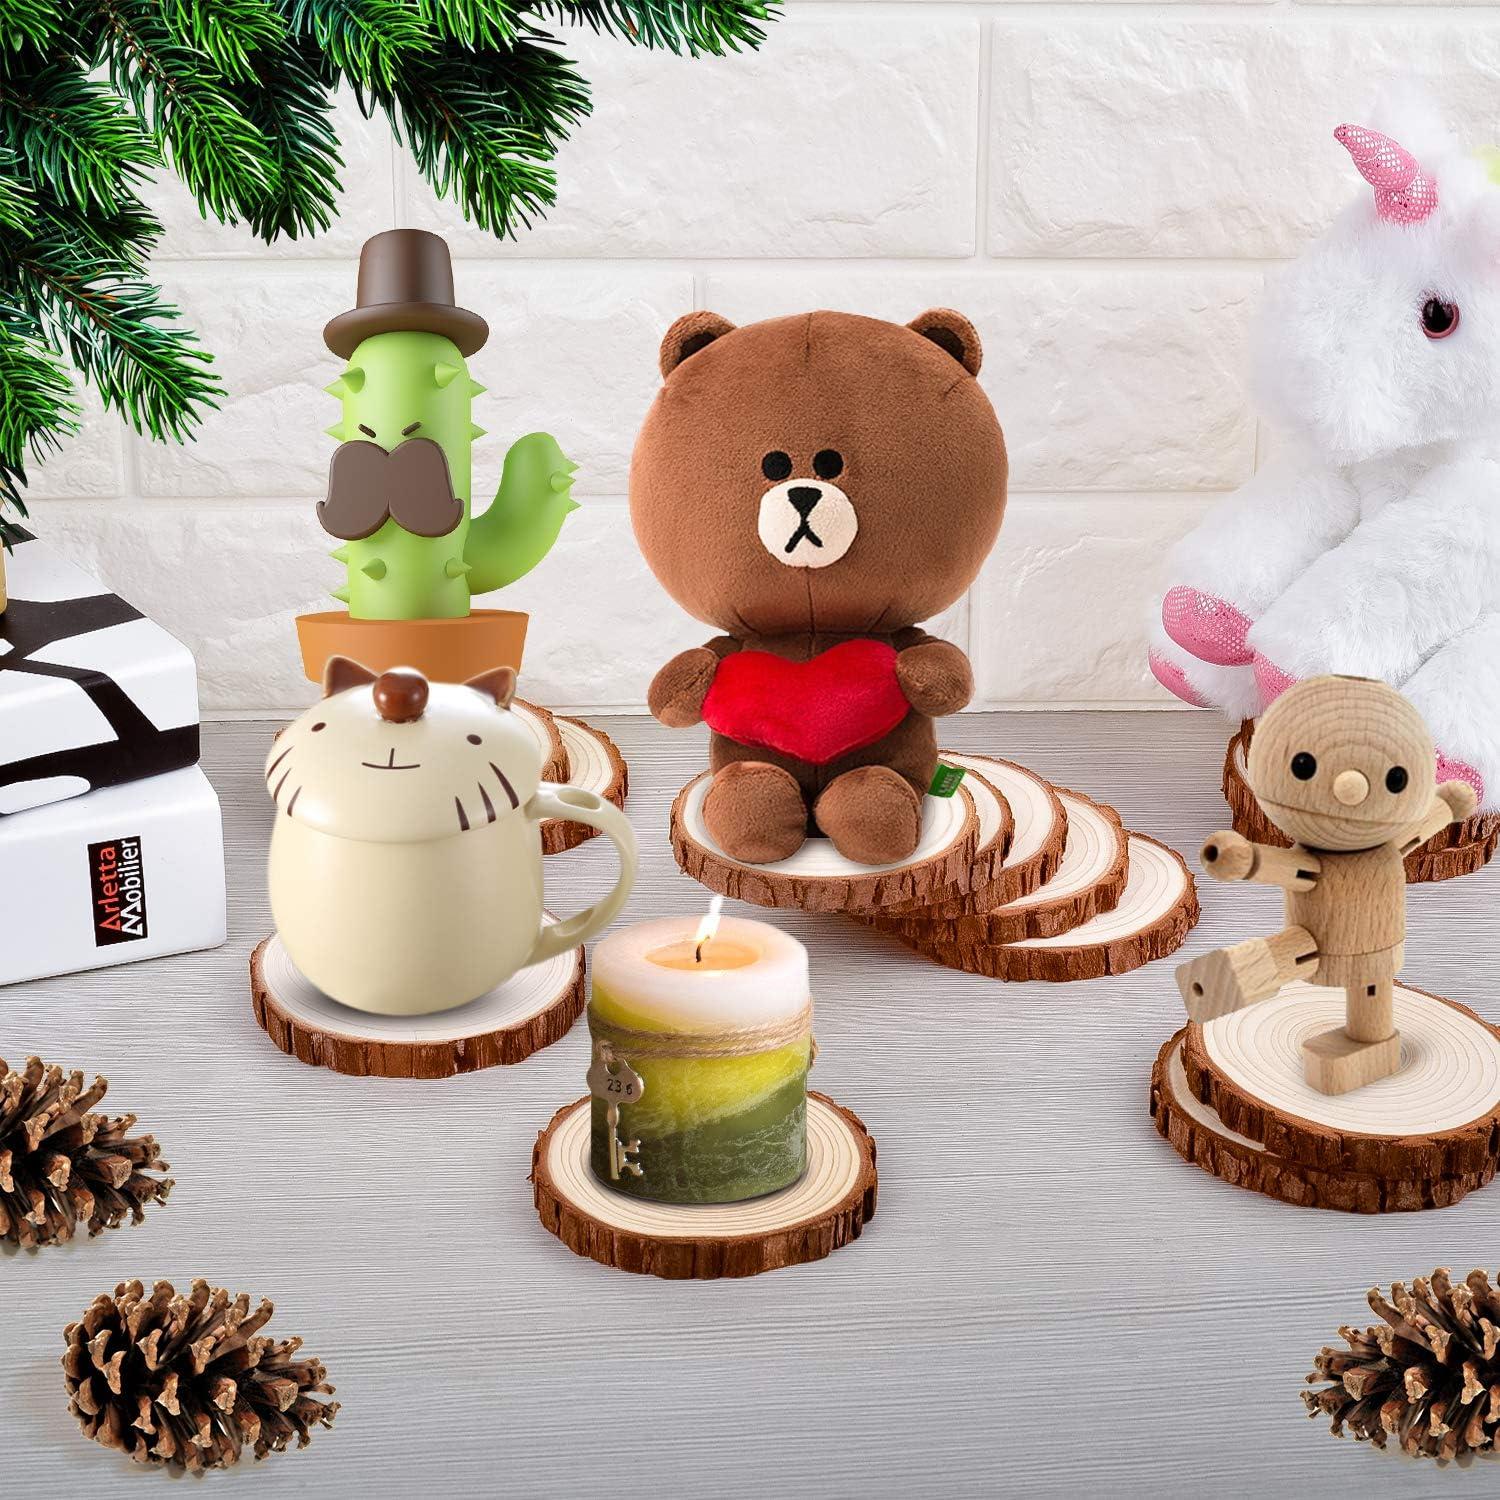 High-Quality craft wood slices for Decoration and More 